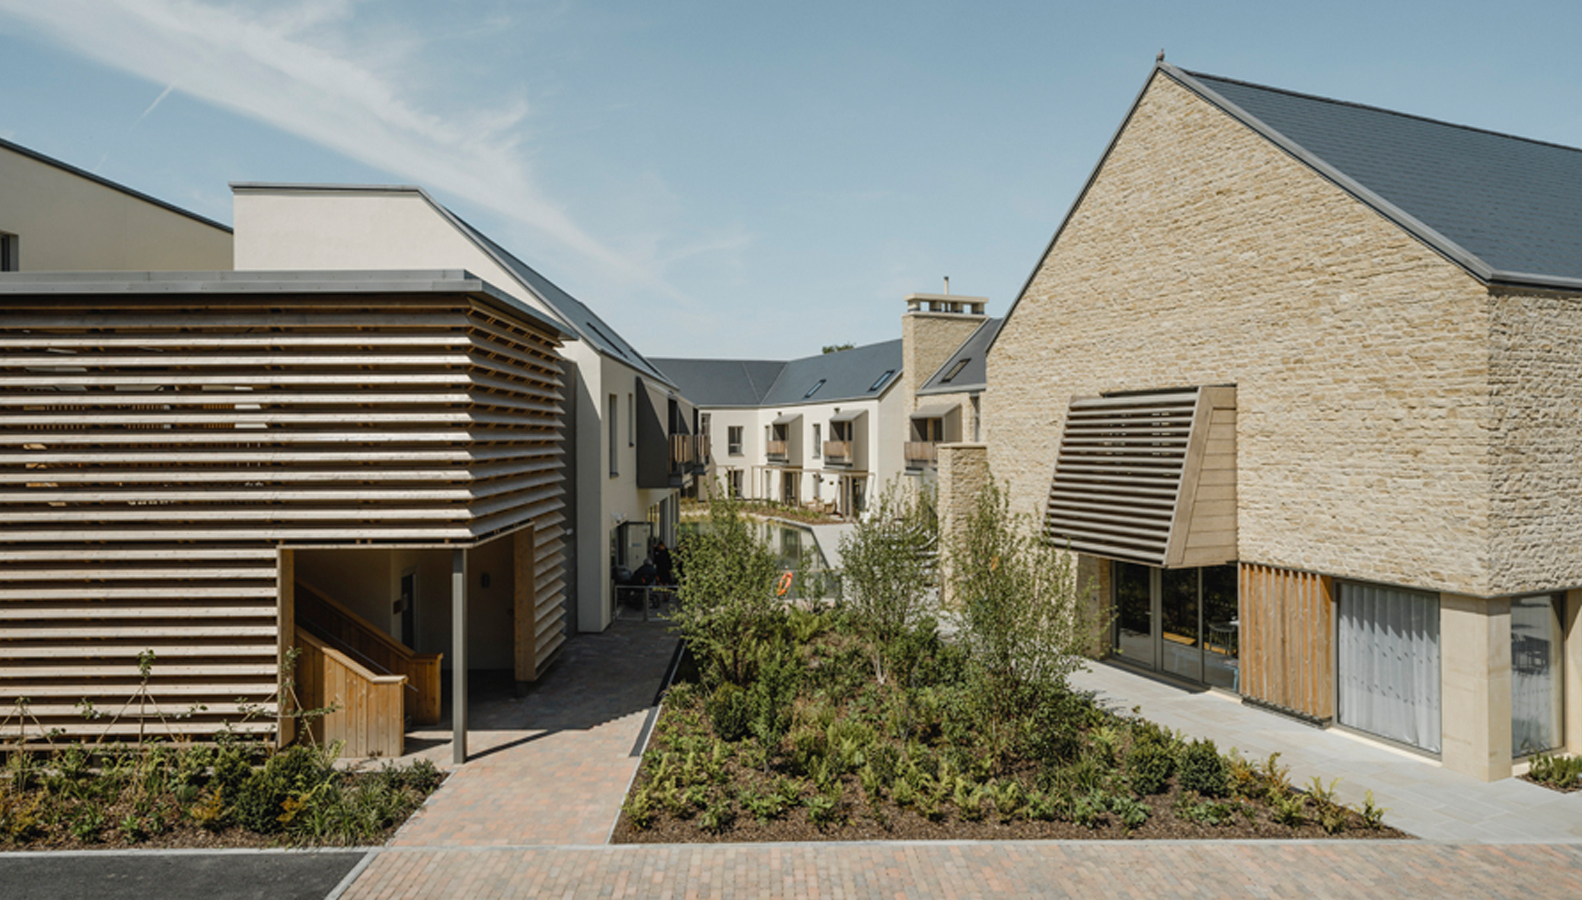 Steepleton shortlisted for Housing Project of the Year at the AJ Architecture Awards